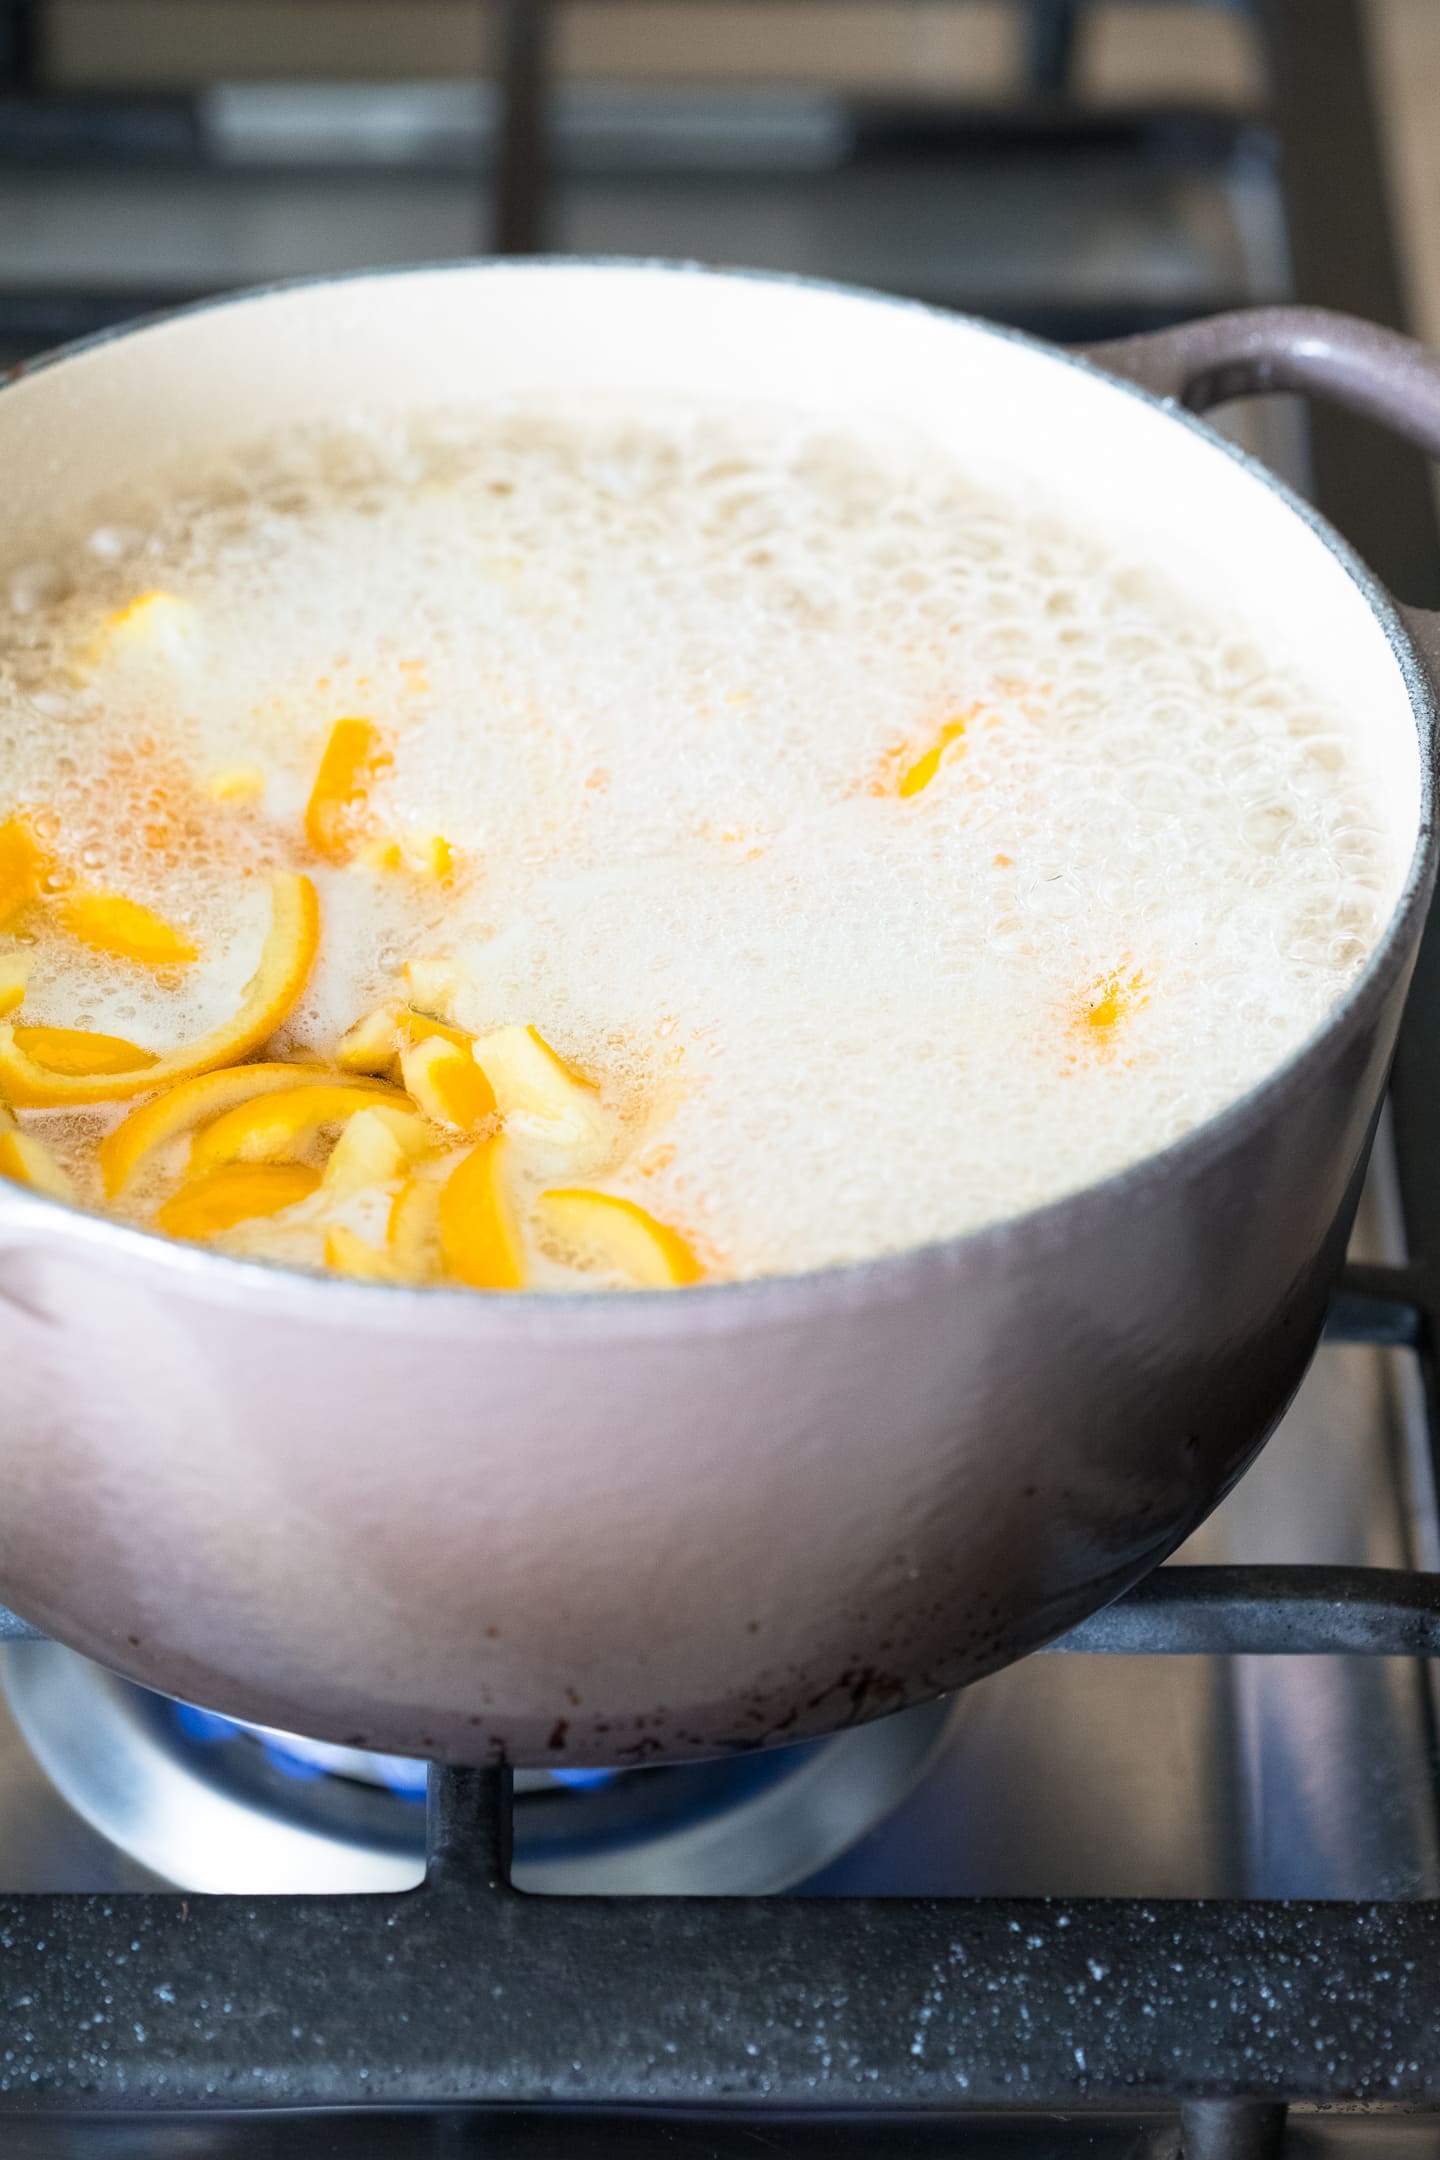 Angled view of orange peels simmering in sugar syrup in a pot on the stove.